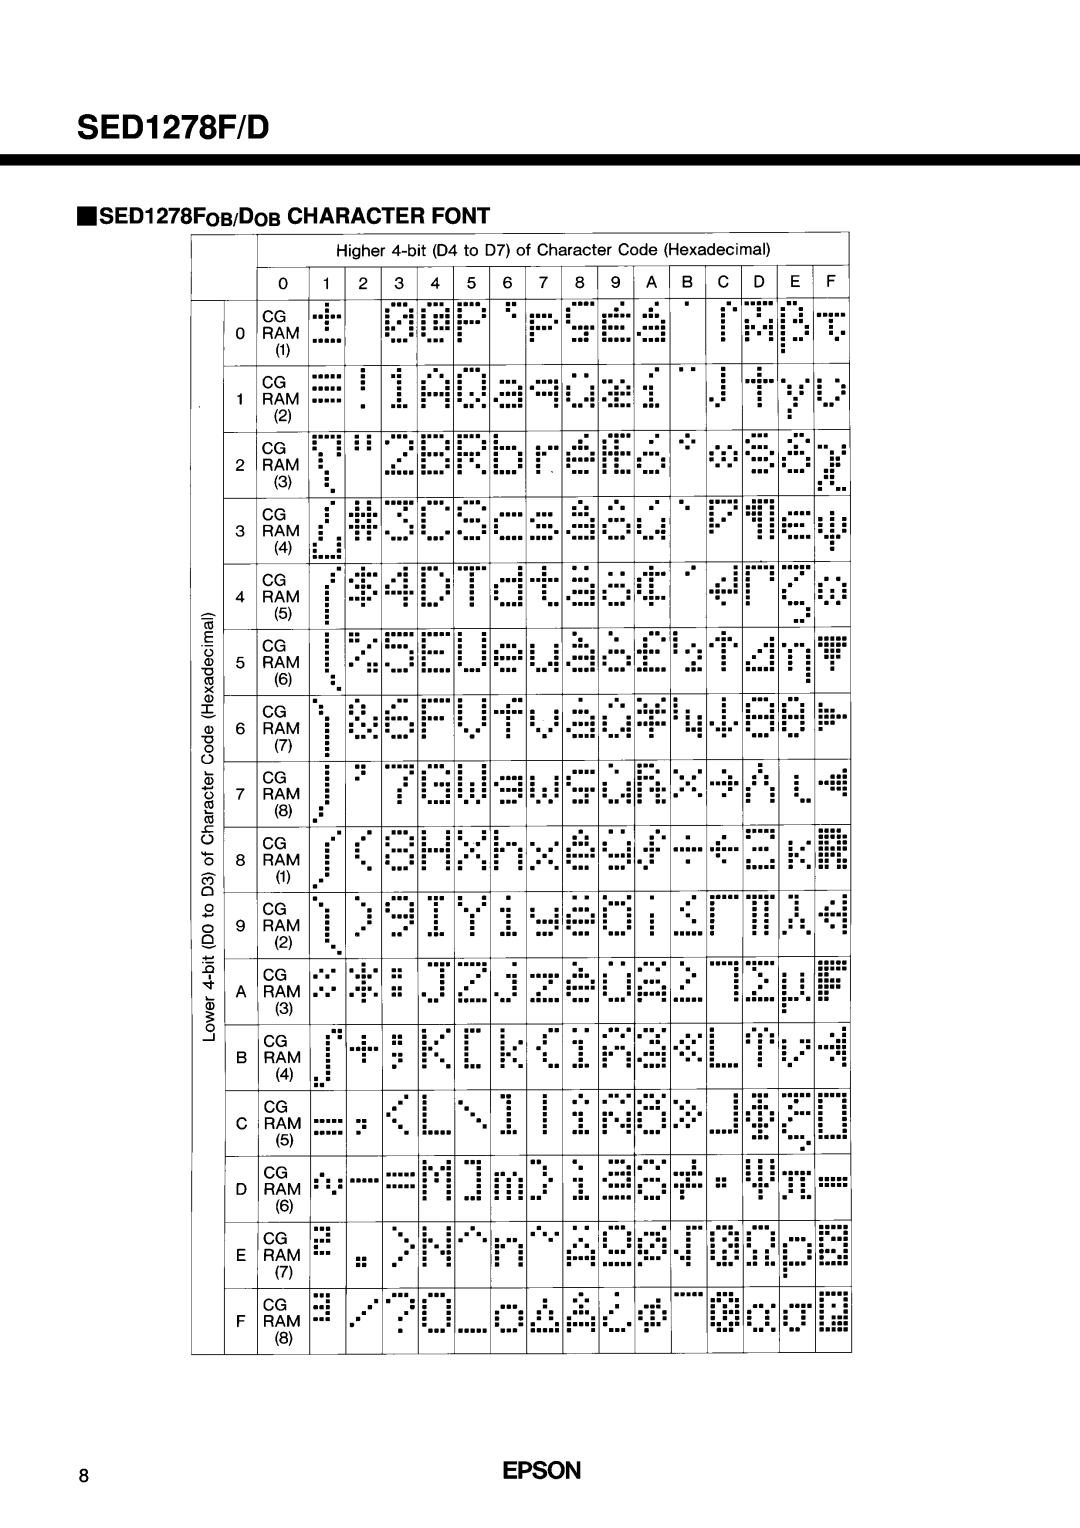 Epson SED1278F/D manual SED1278FOB/DOB CHARACTER FONT 